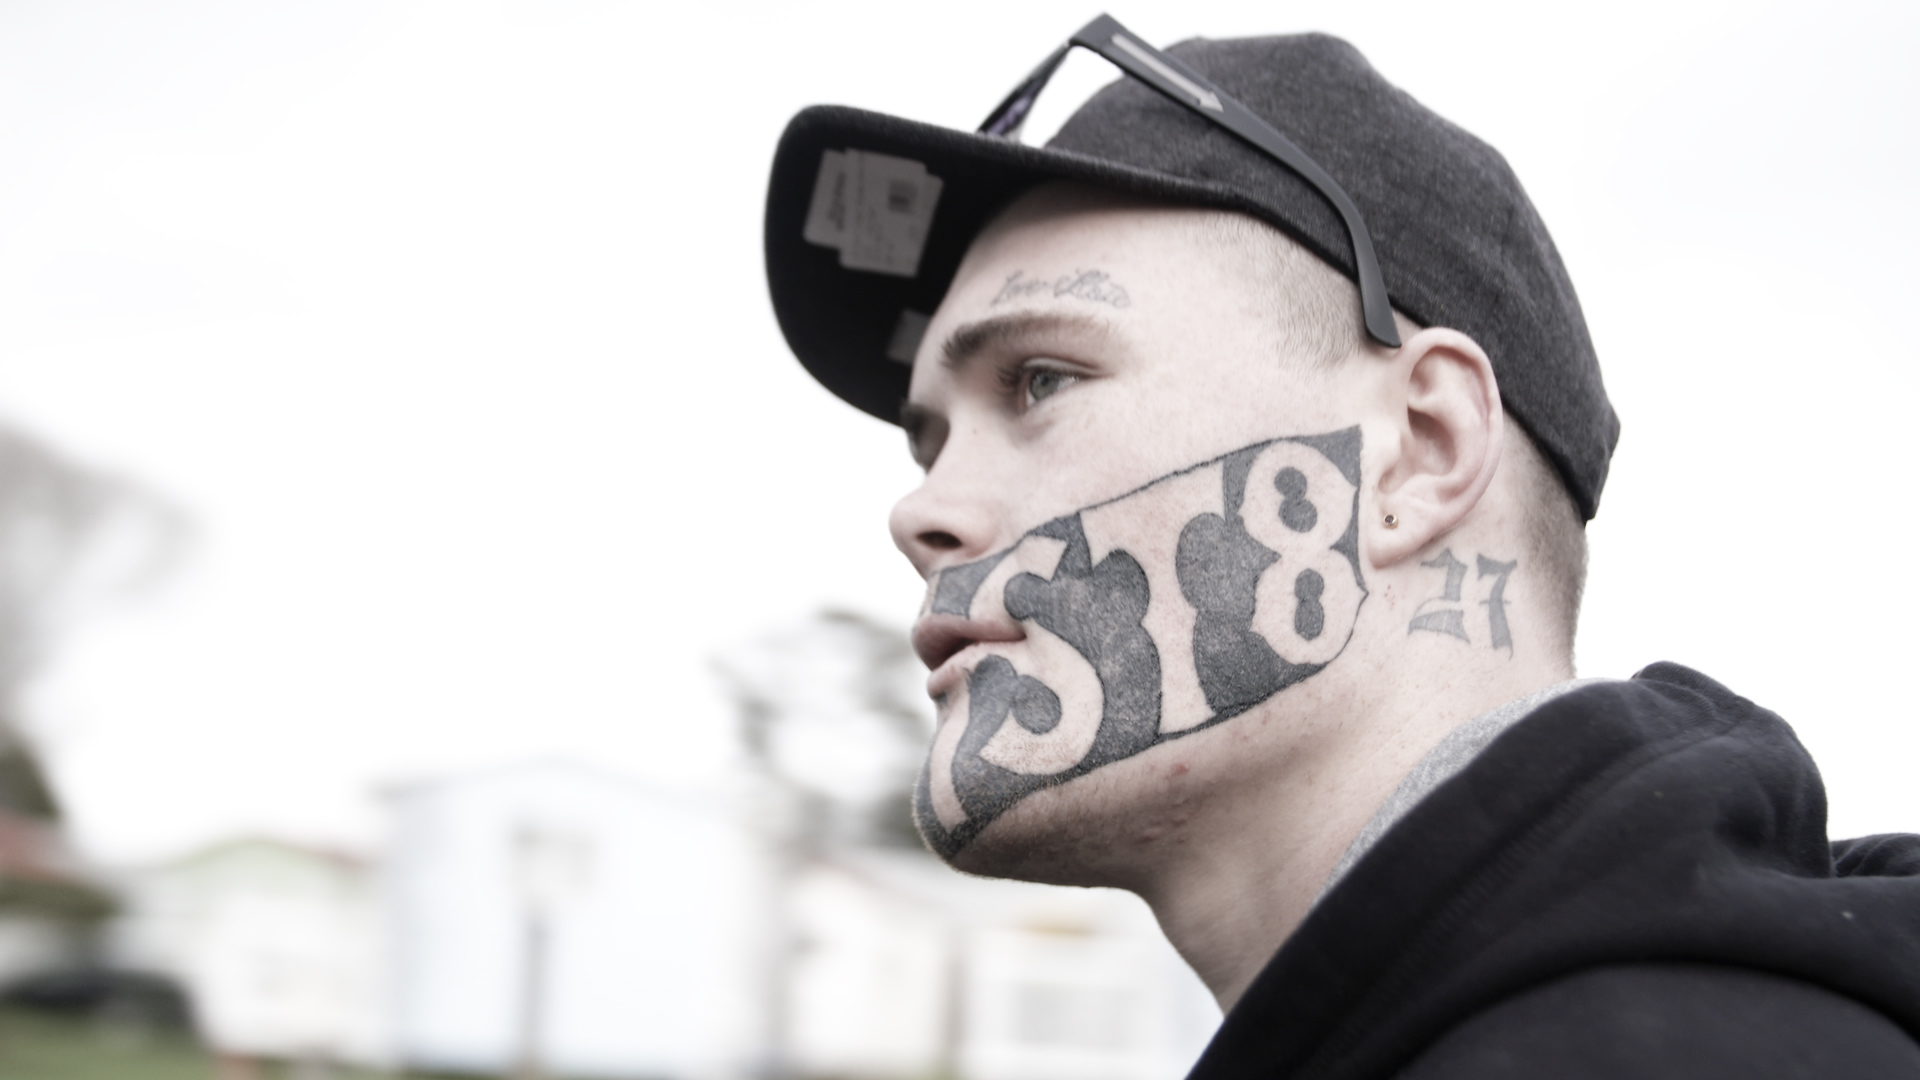 Man with 'DEVAST8' face tattoo decides to keep it after starting new job |  The Independent | The Independent